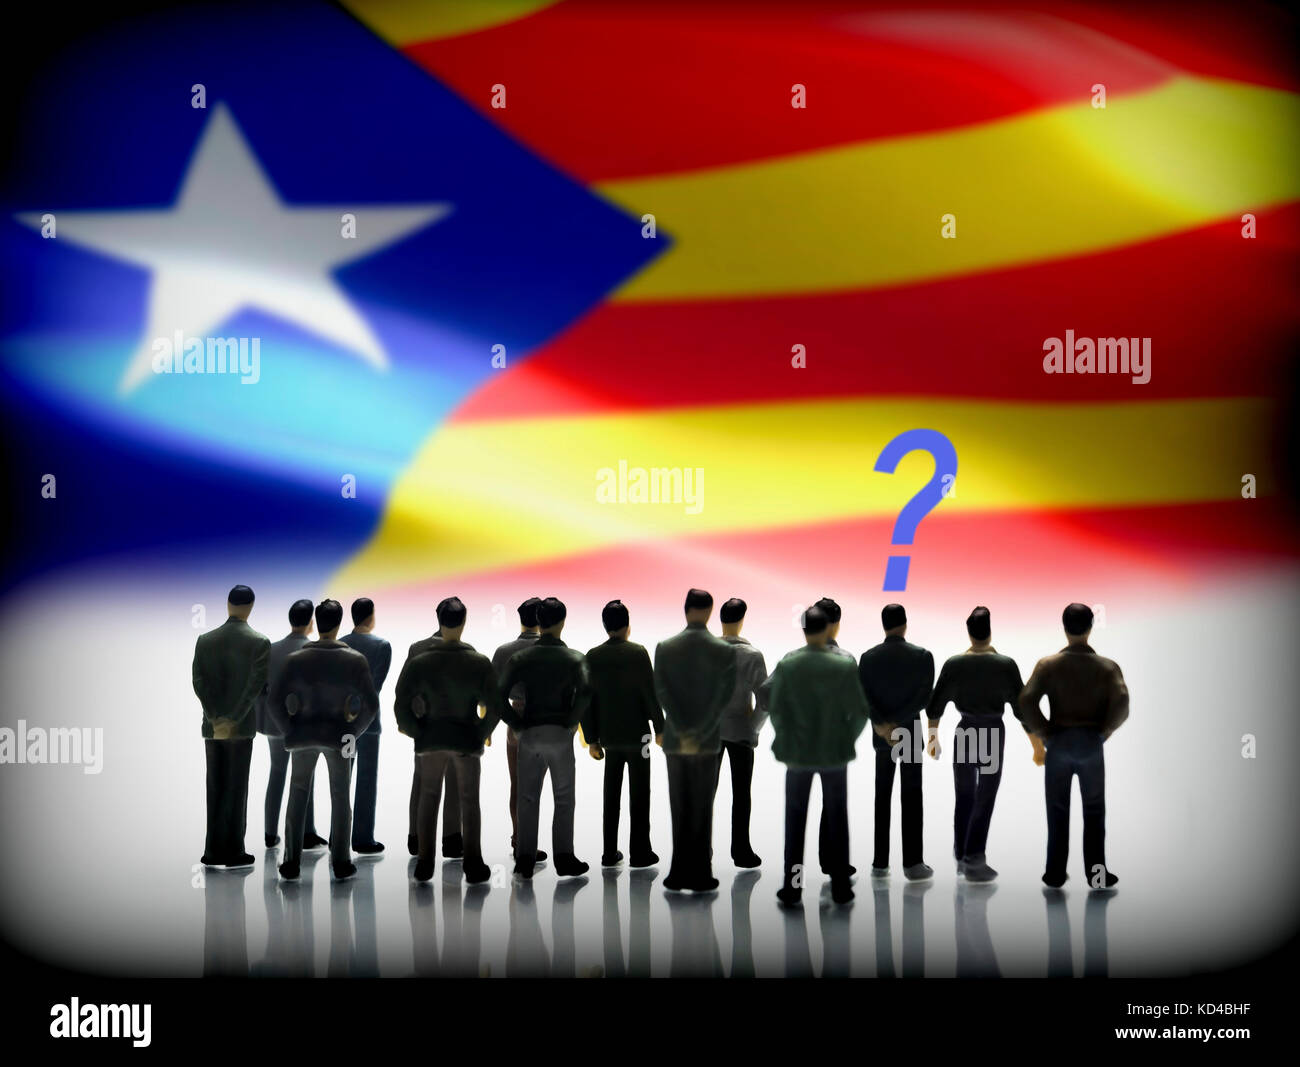 Silhouettes of figures of undecided persons in front of a flag independence of catalonia, digital composition, conceptual image Stock Photo